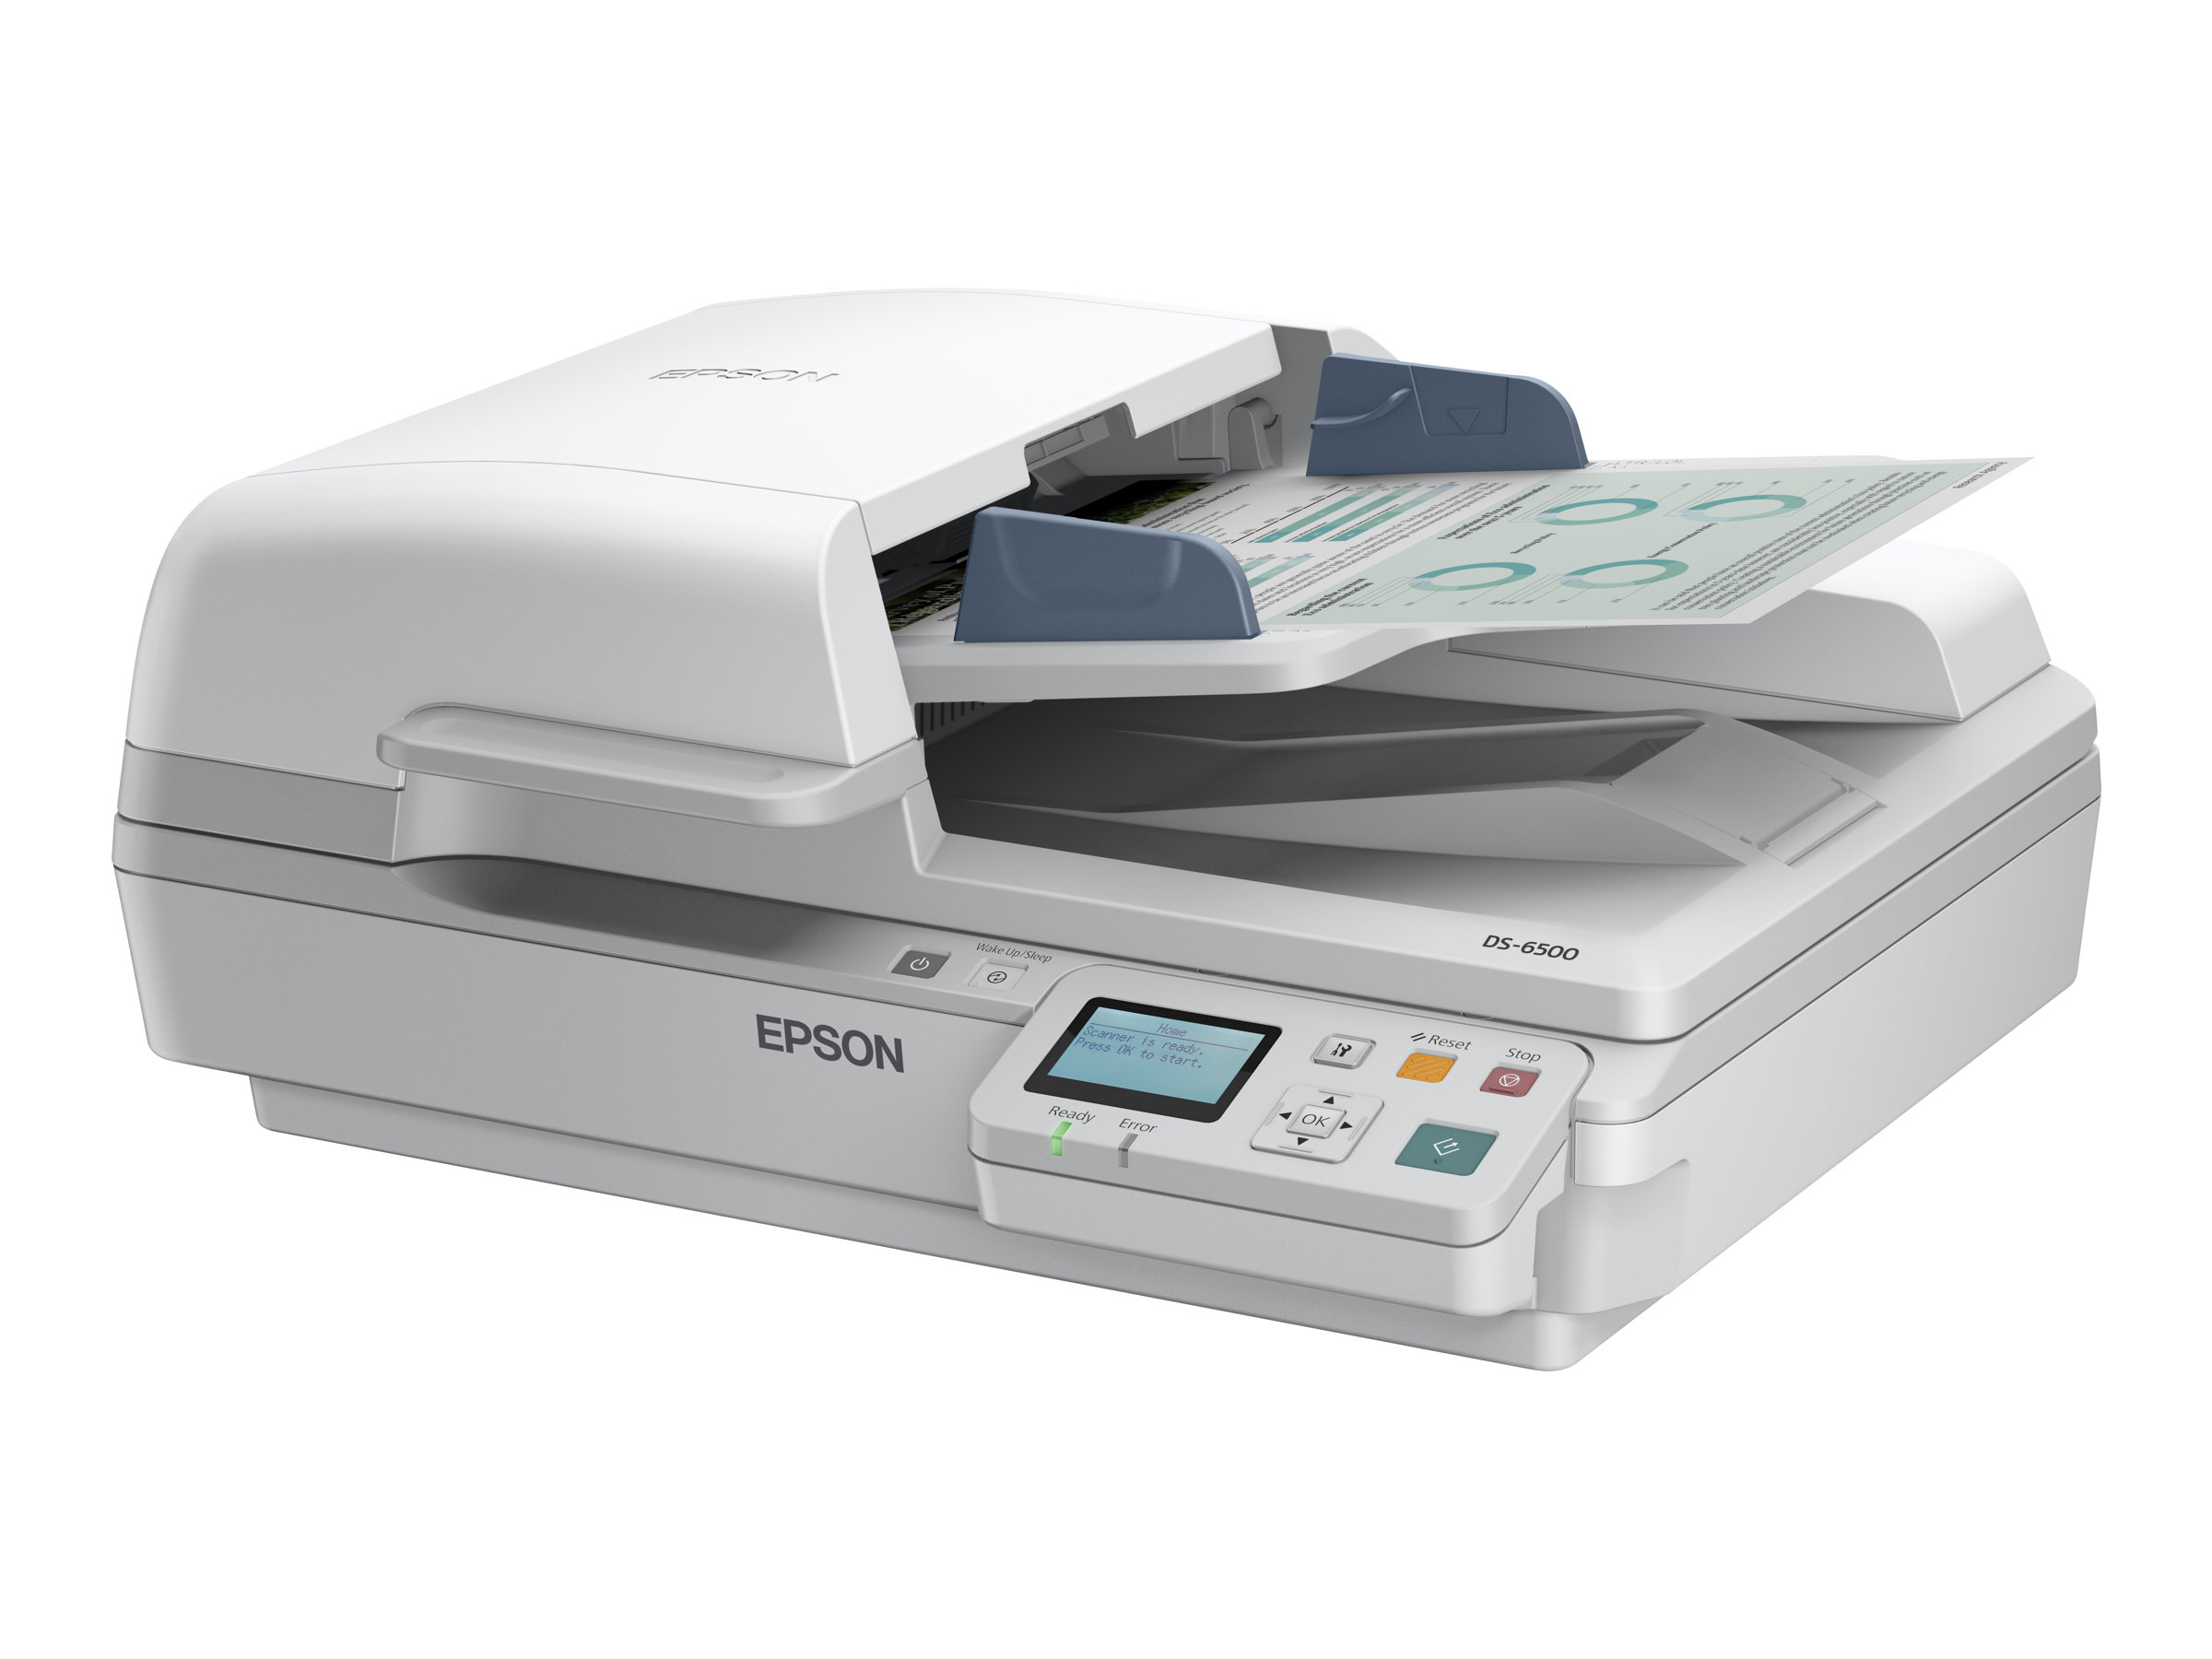 Epson WorkForce DS-7500N - scanner de documents A4 - 1200 ppp x 1200 ppp - 40ppm